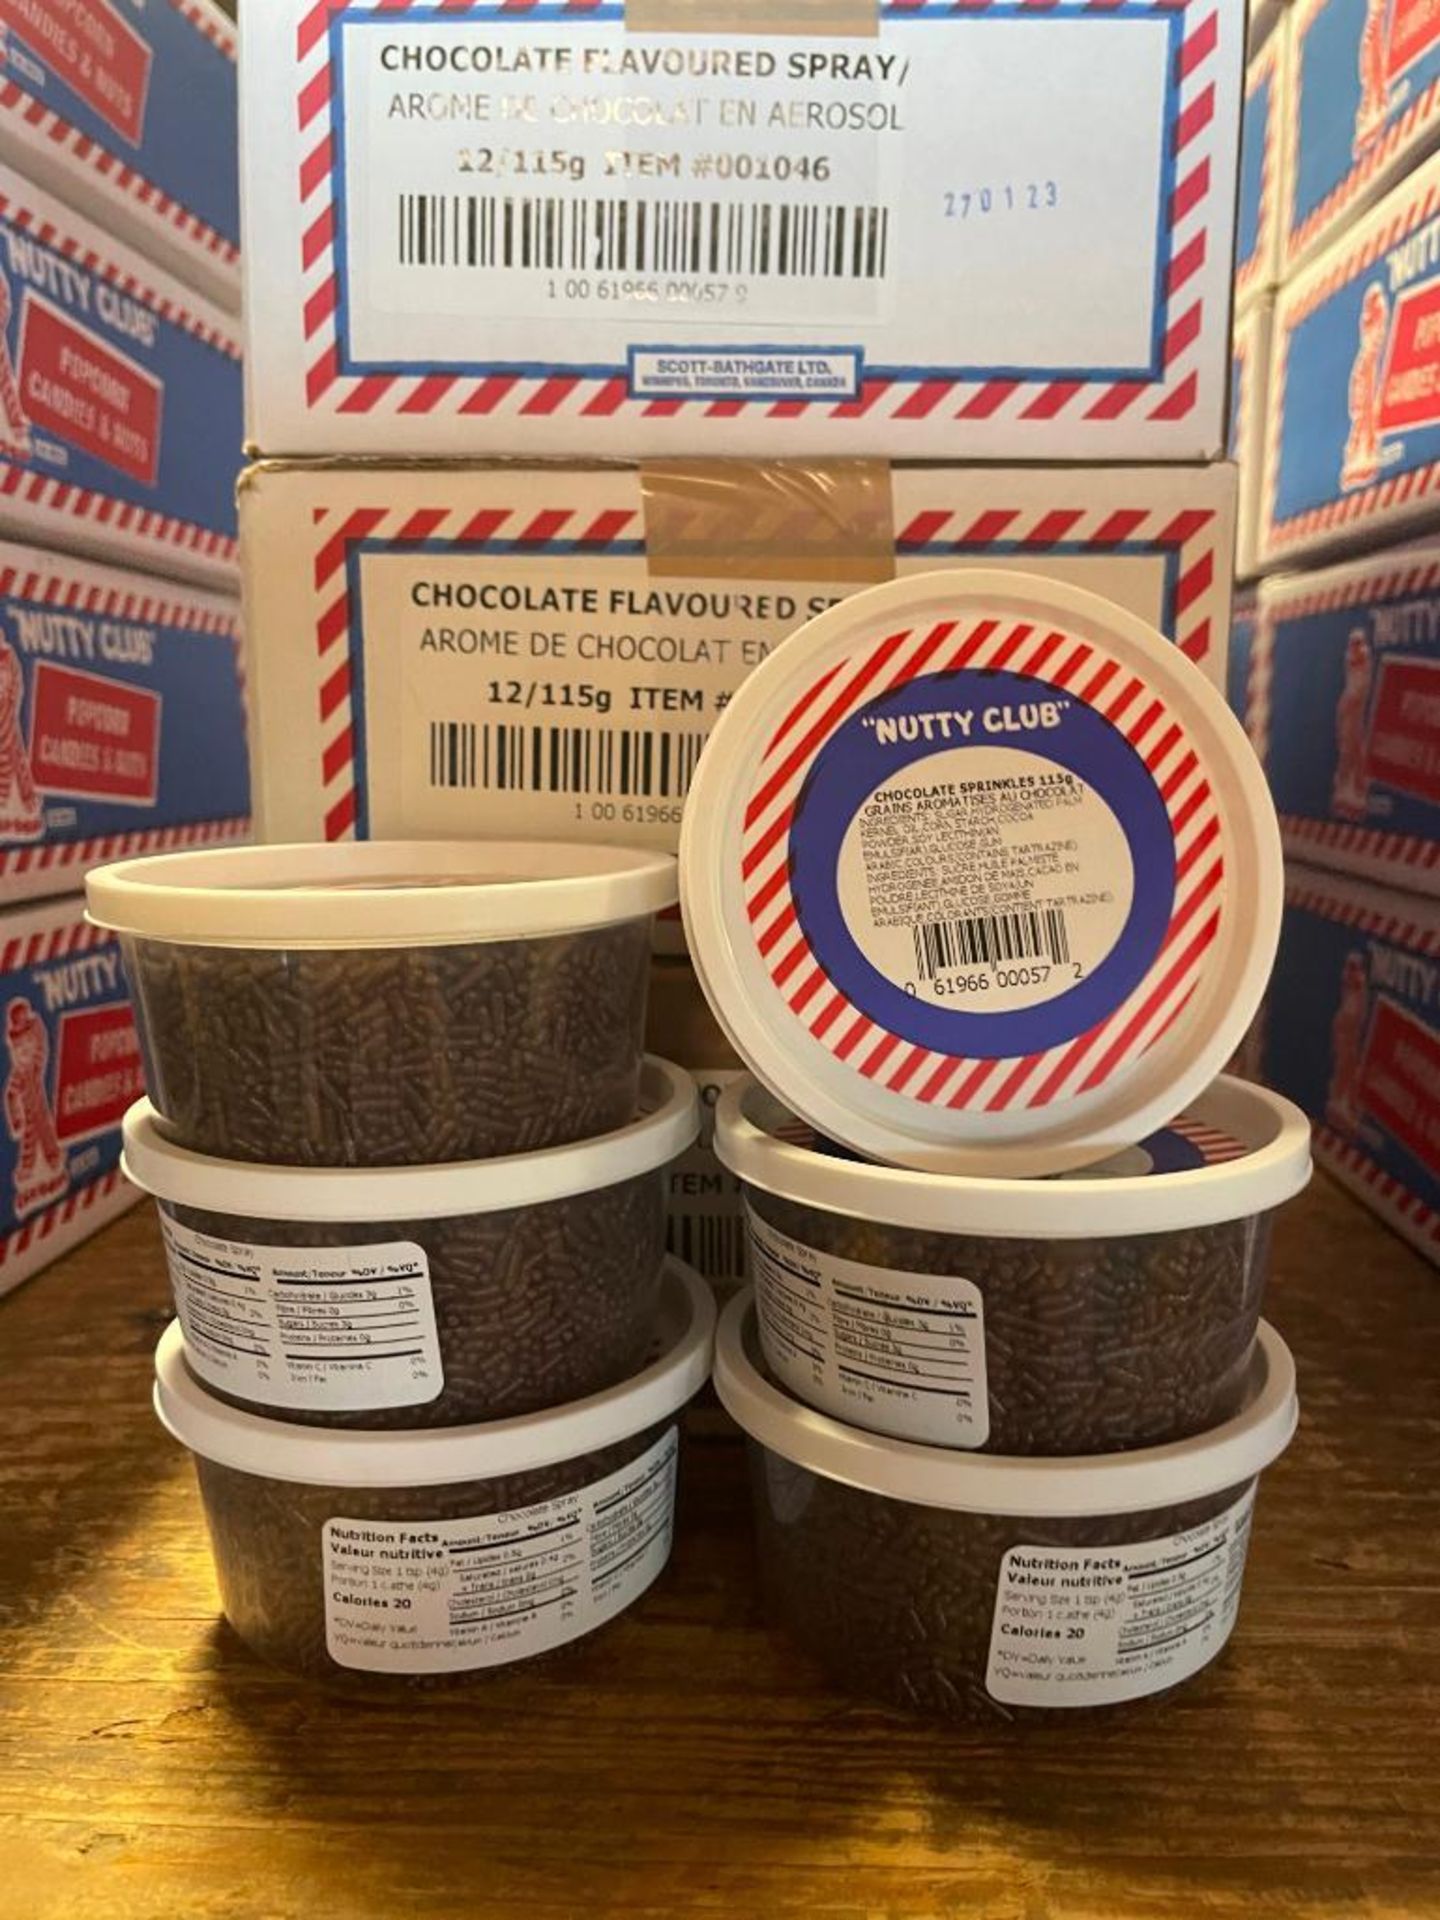 (8) BOXES OF NUTTY CLUB CHOCOLATE SPRINKLES, 12/115G TUBS PER BOX - Image 3 of 3